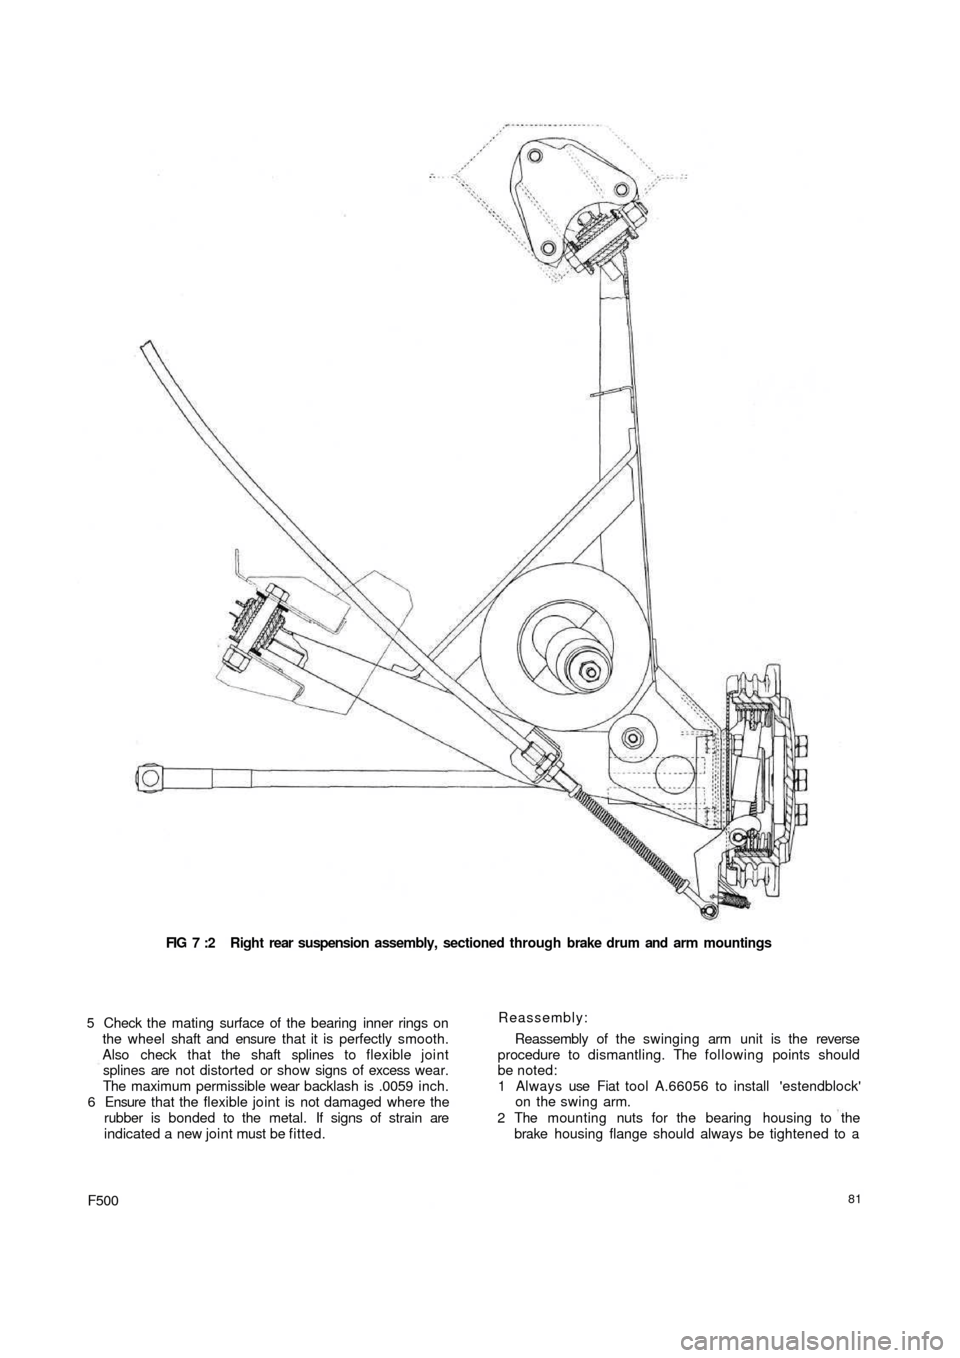 FIAT 500 1961 1.G Workshop Manual FIG 7 :2  Right rear suspension  assembly, sectioned through brake drum and arm mountings
5 Check the mating surface of the bearing inner rings on
the wheel shaft and ensure that it is perfectly smoot